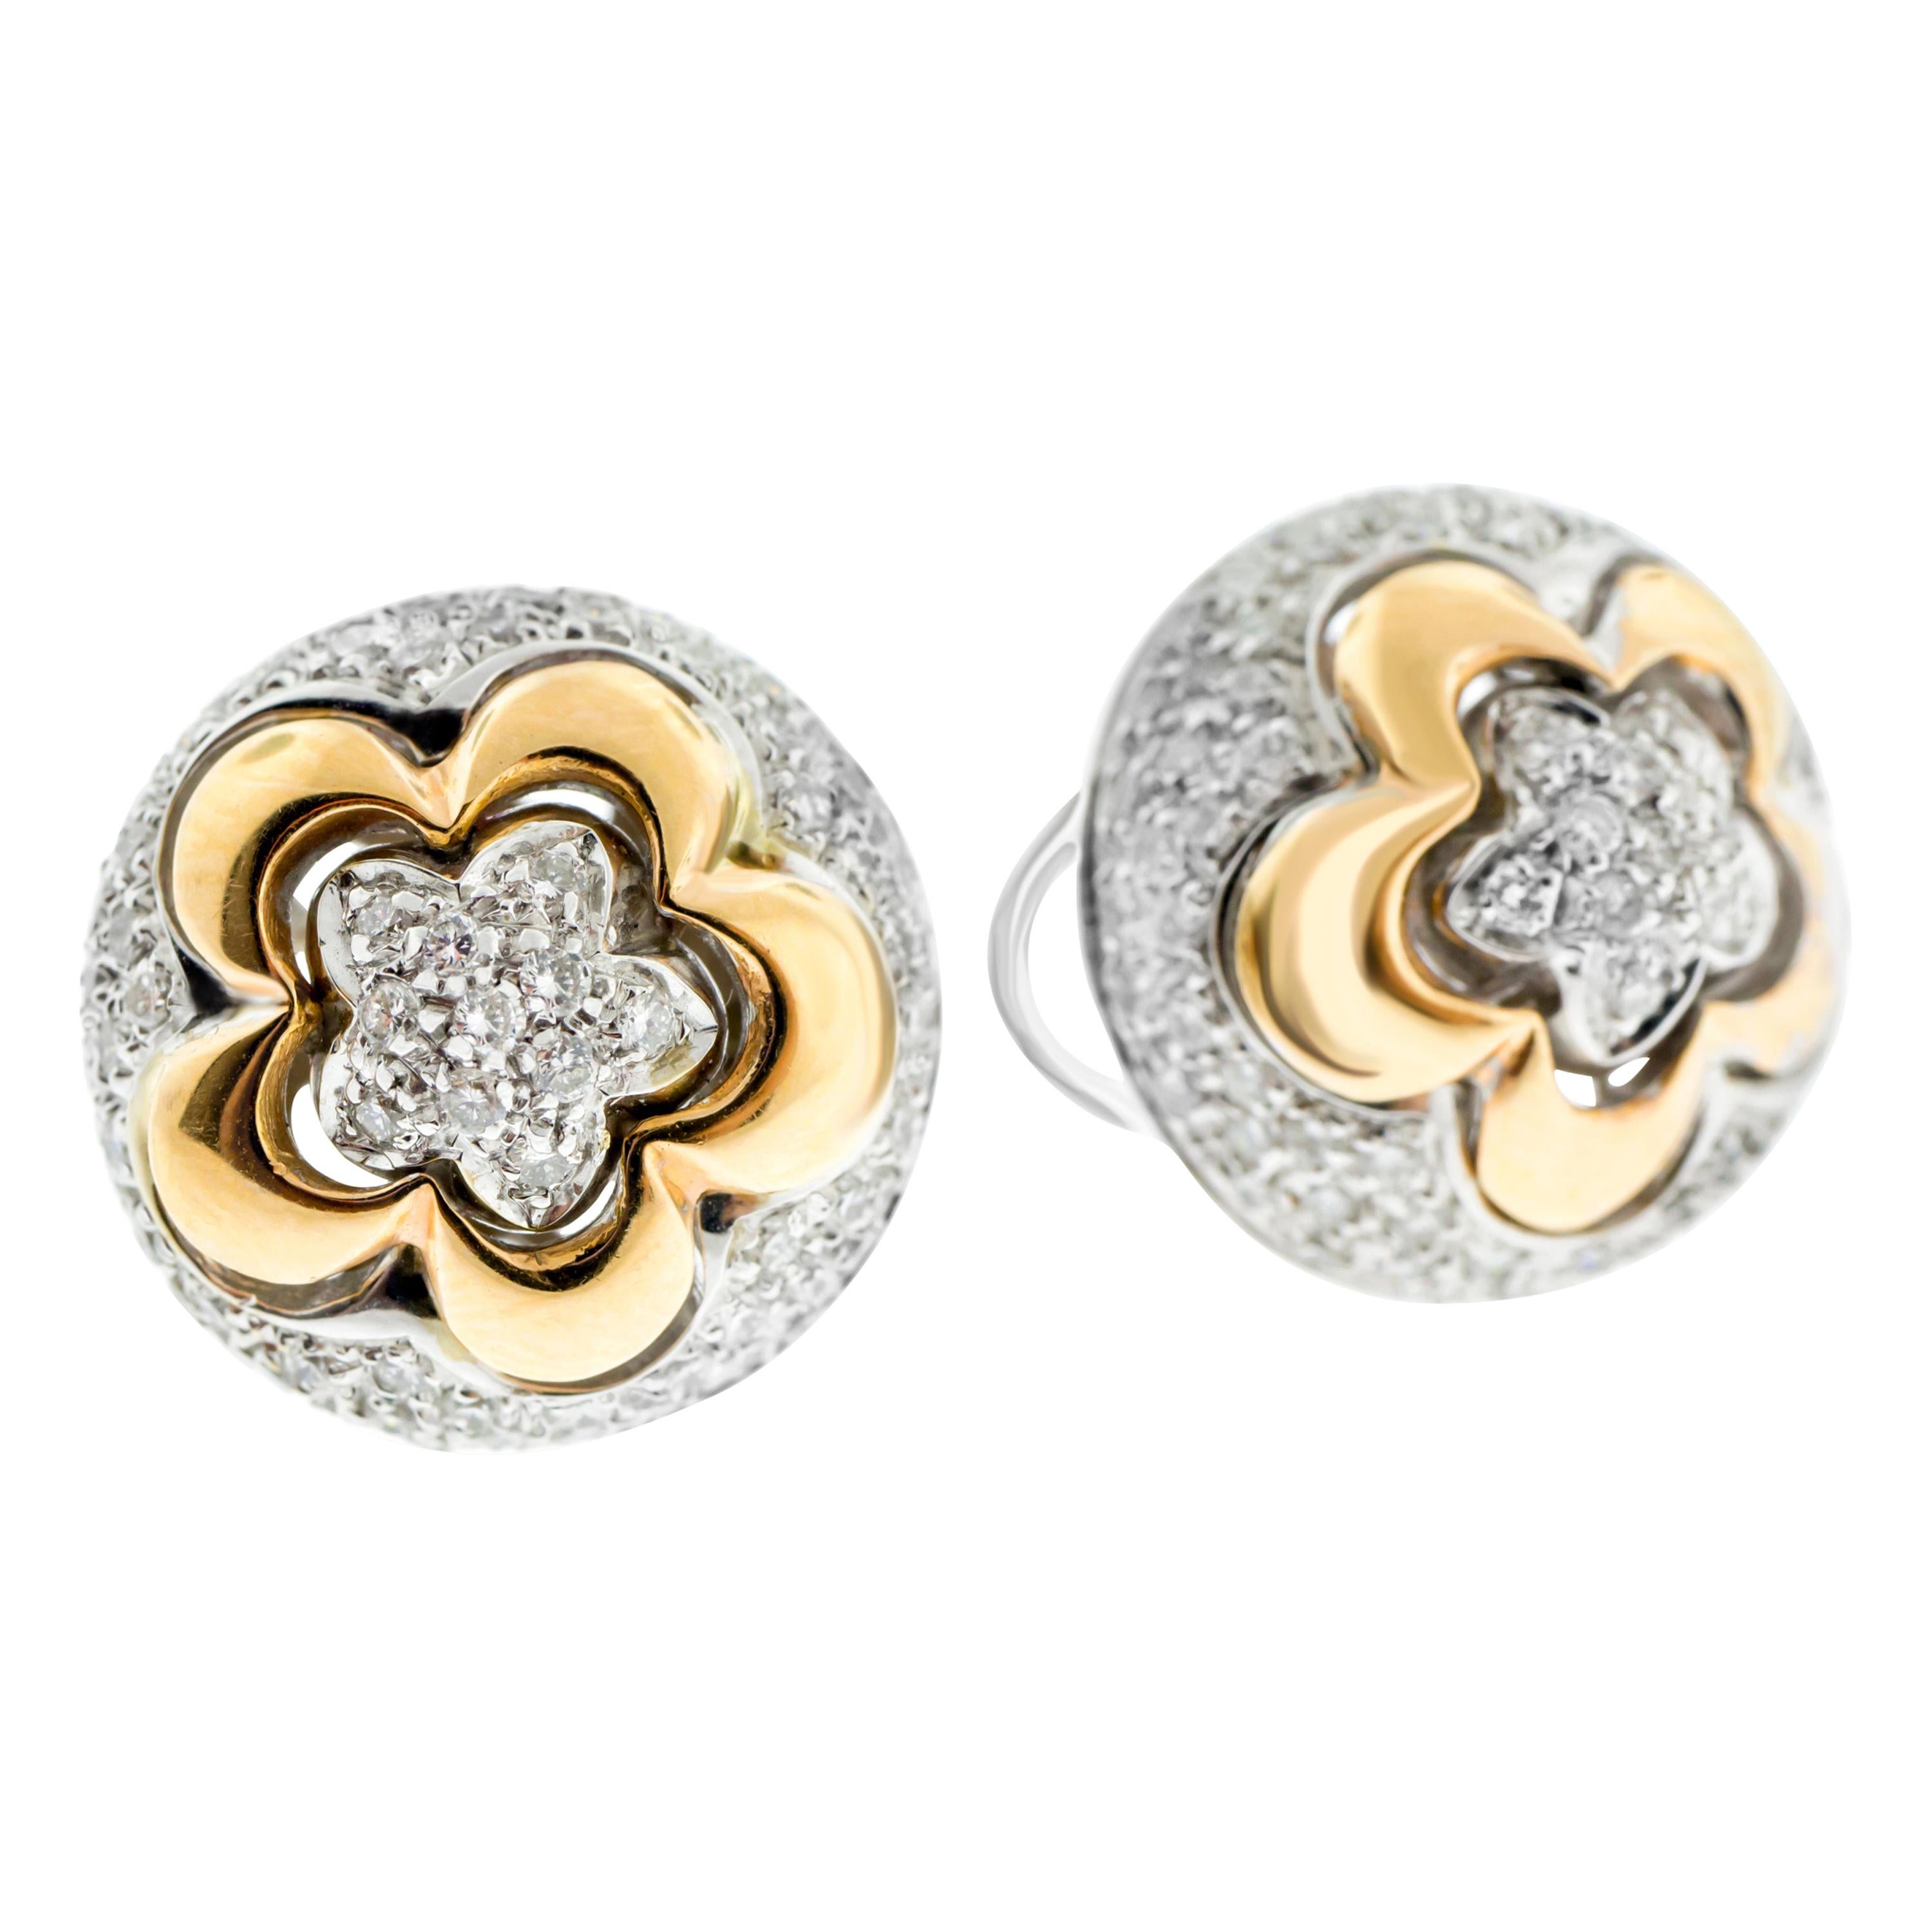 18 Karat Rose and White Gold Diamond Pave Flower Ear Clips